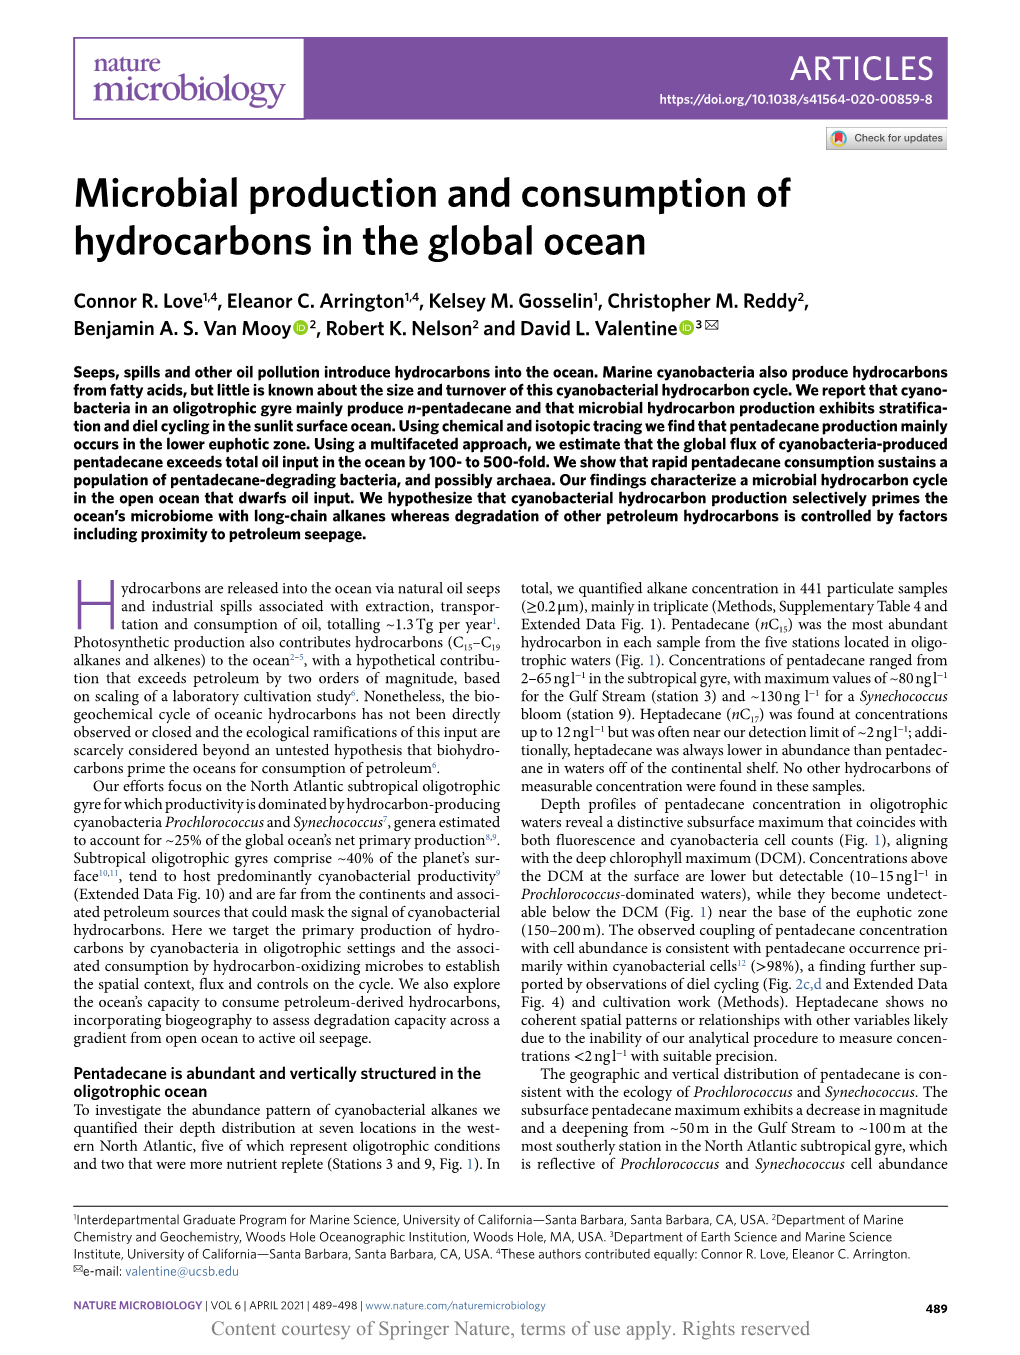 Microbial Production and Consumption of Hydrocarbons in the Global Ocean